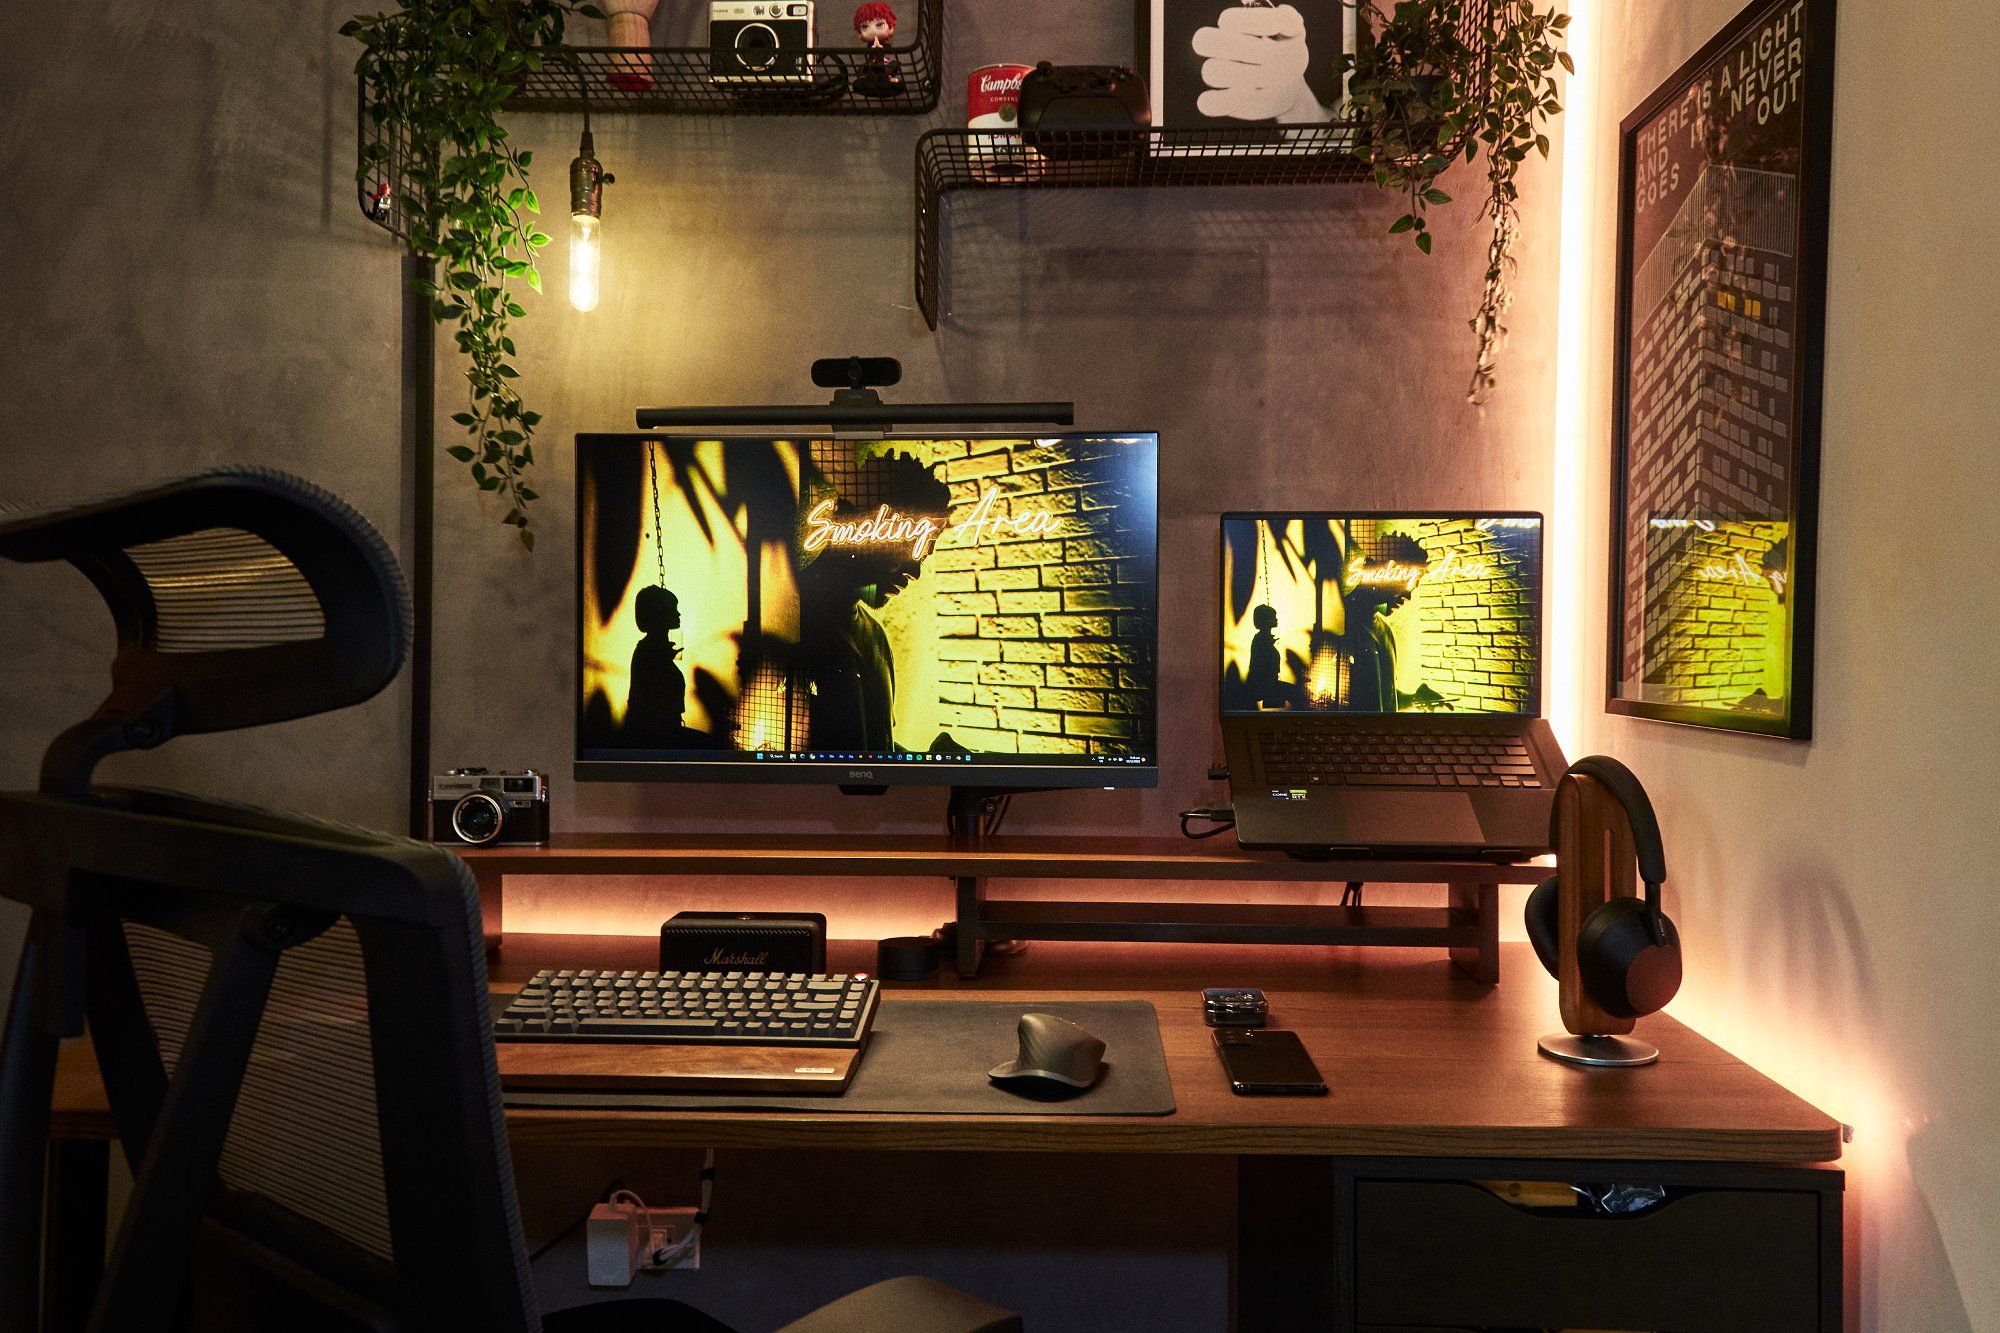 A dark desk setup with a monitor and a laptop, both displaying the Smoking Area desktop wallpaper